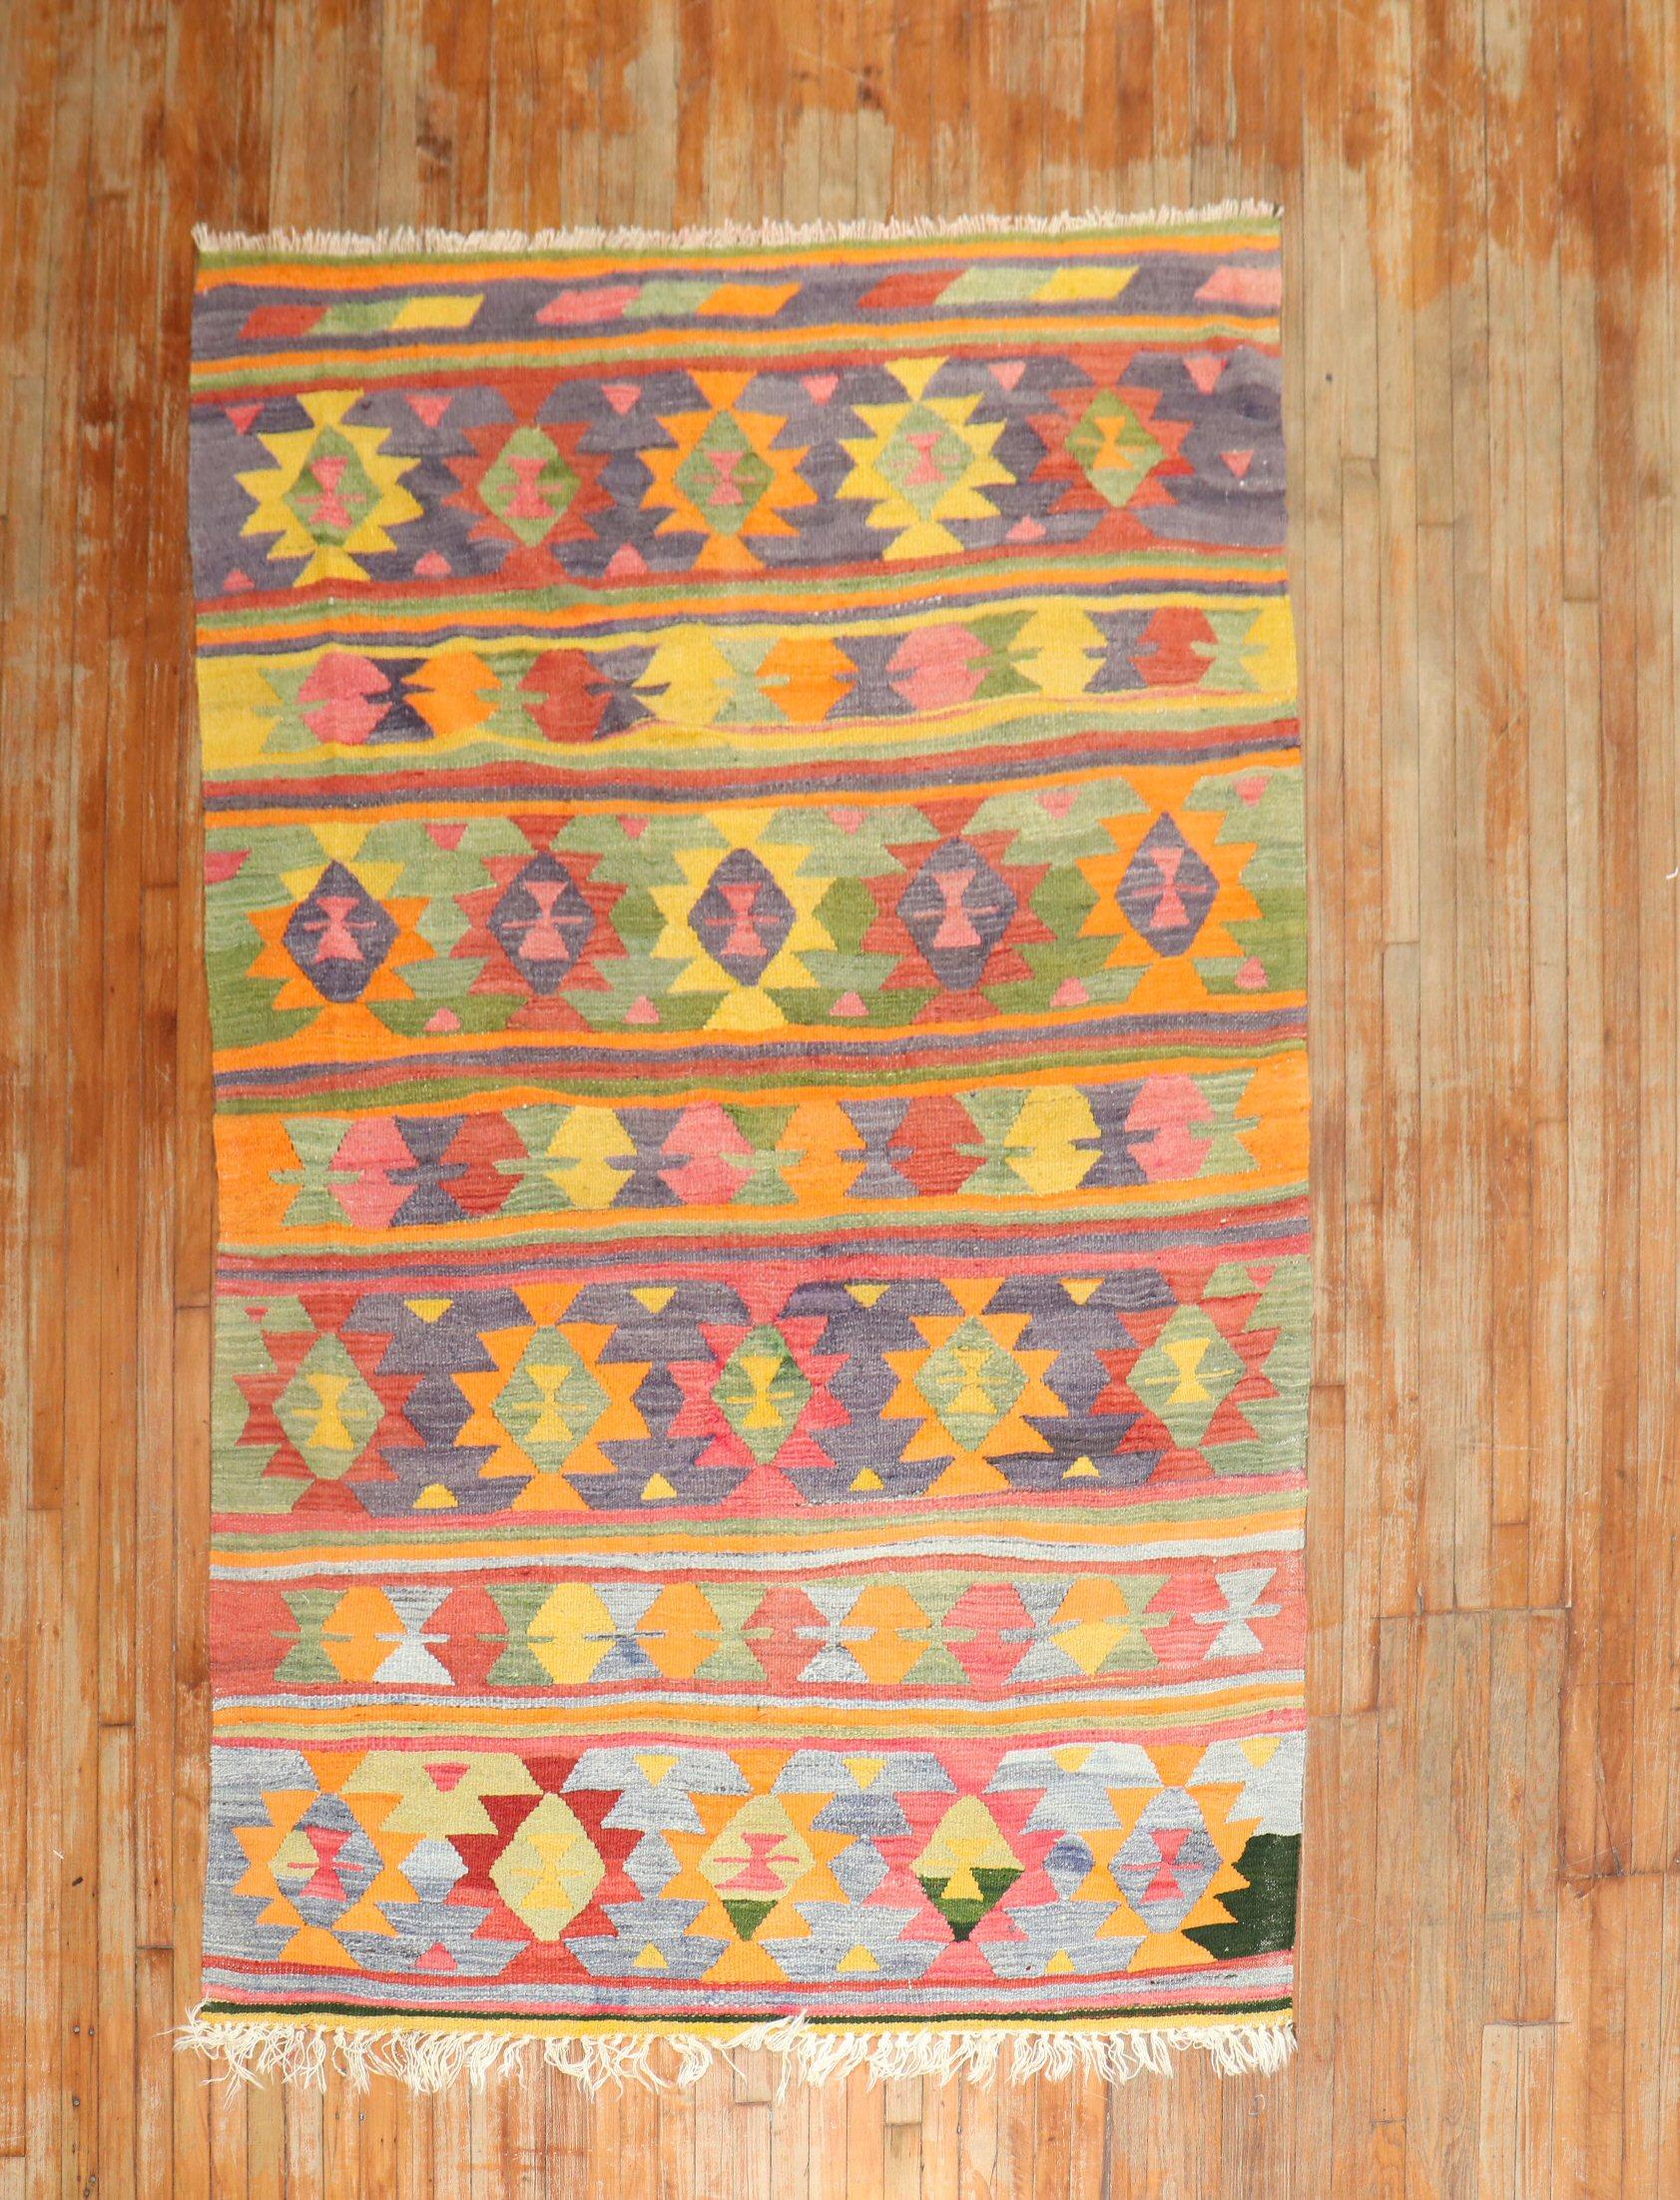 3rd Quarter of the 20th century Turkish Kilim in fun colors.

Measures: 5'6